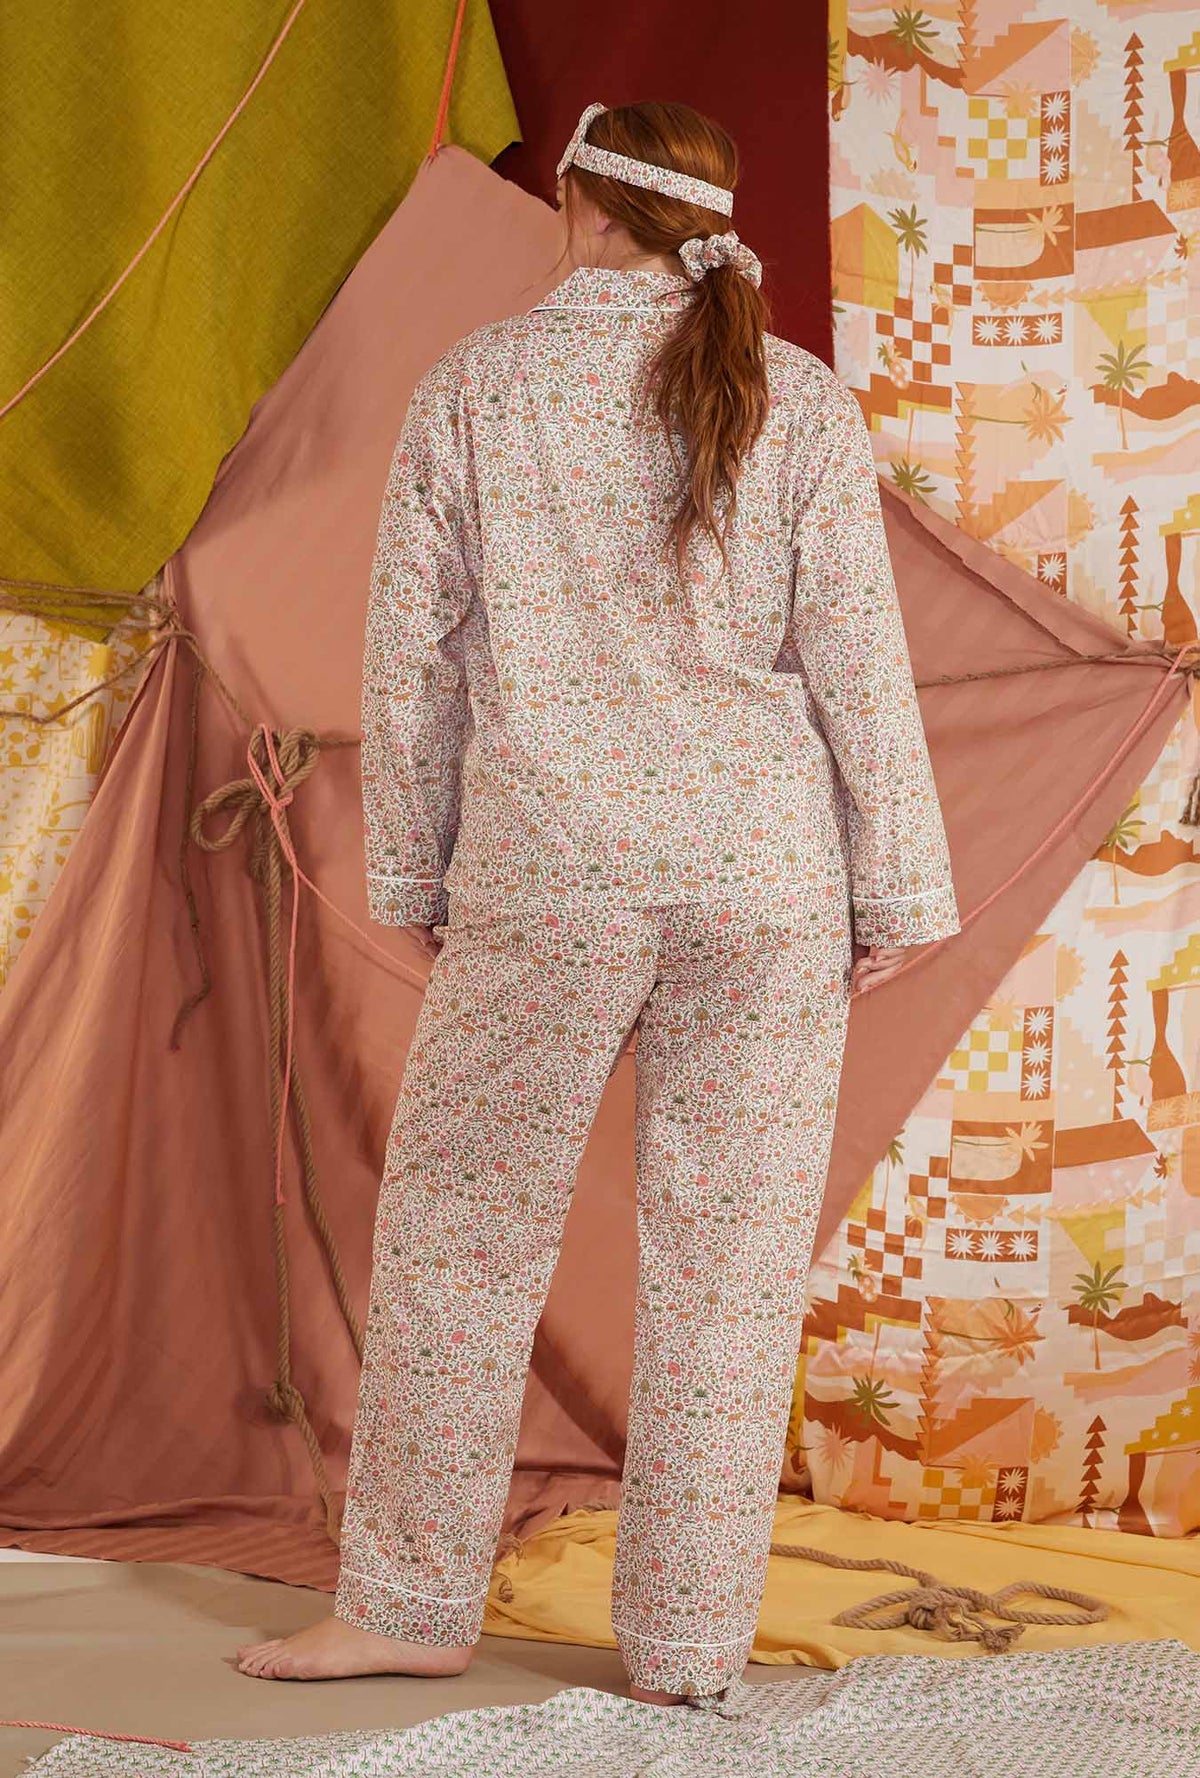 A lady wearing multi color long sleeve tana lawn classic plus size pj set with imran print.